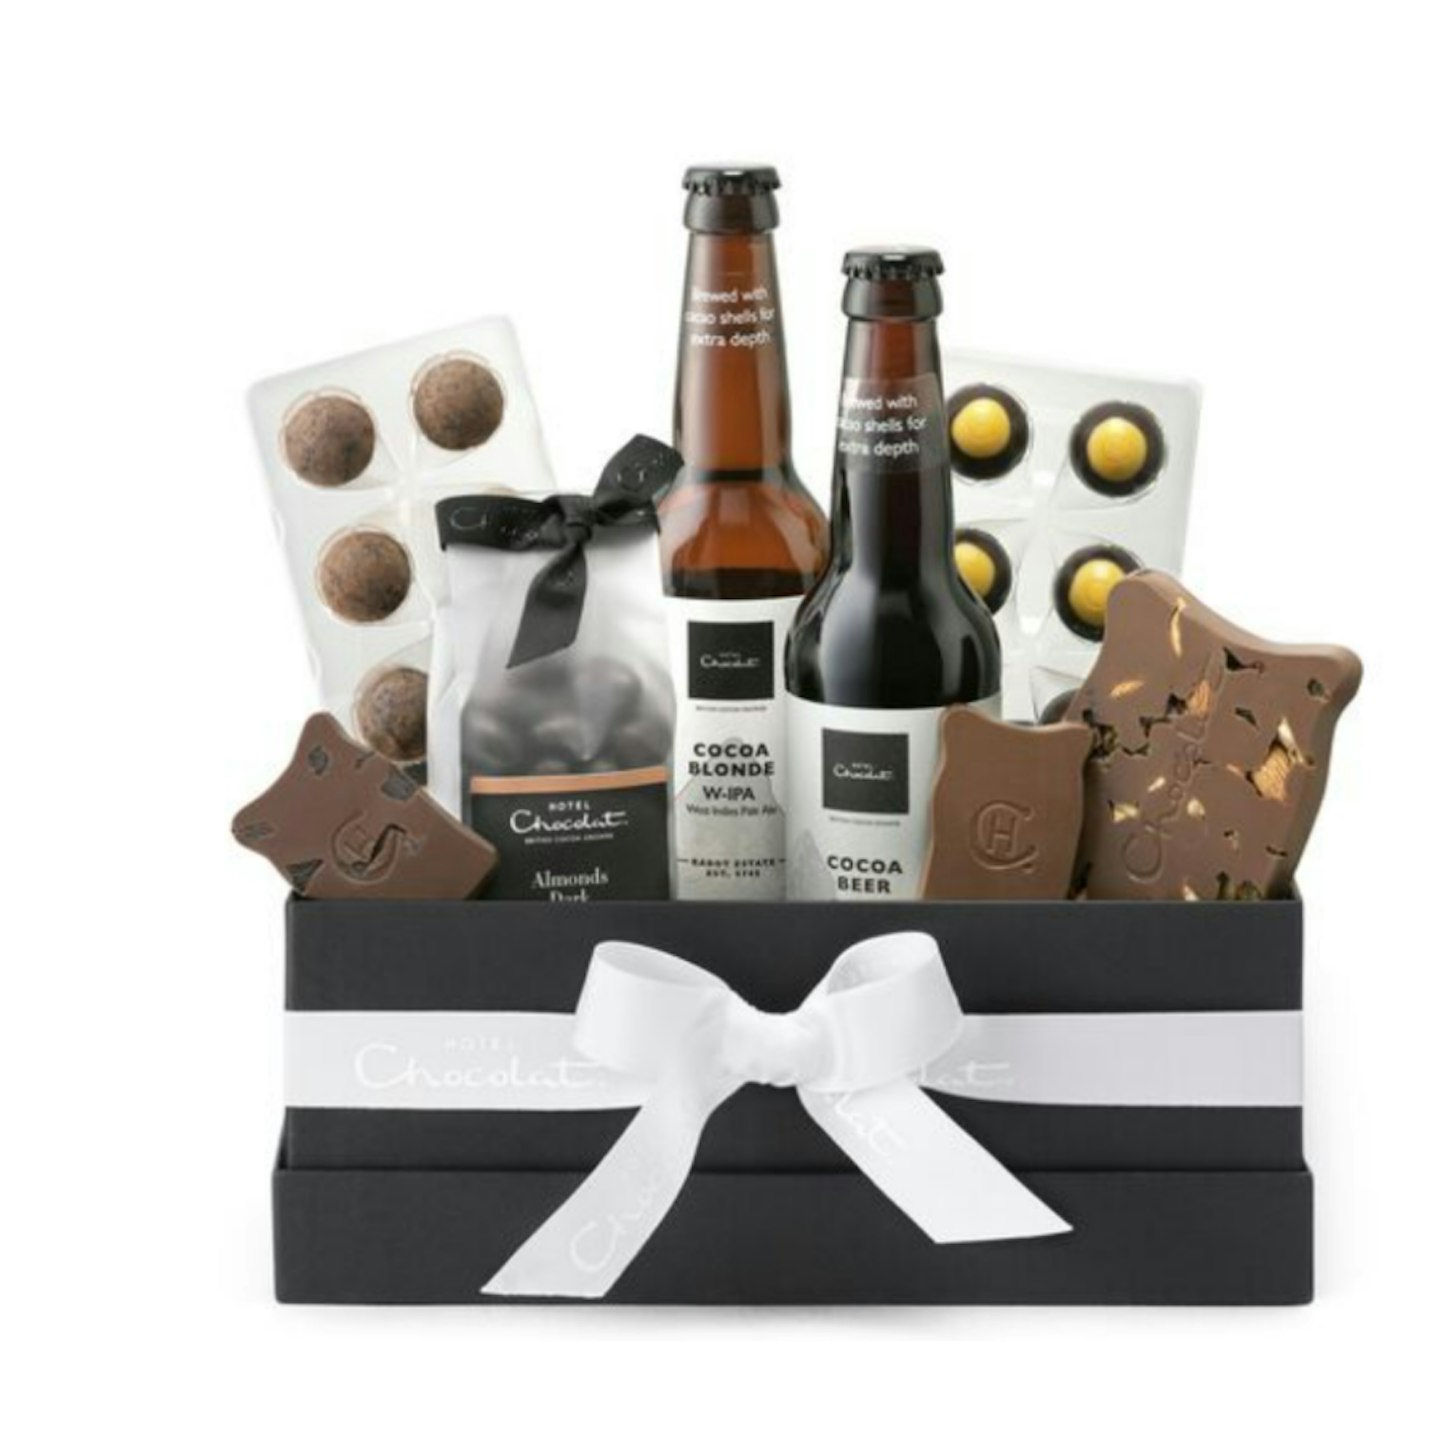 The Beer and Chocolate Hamper